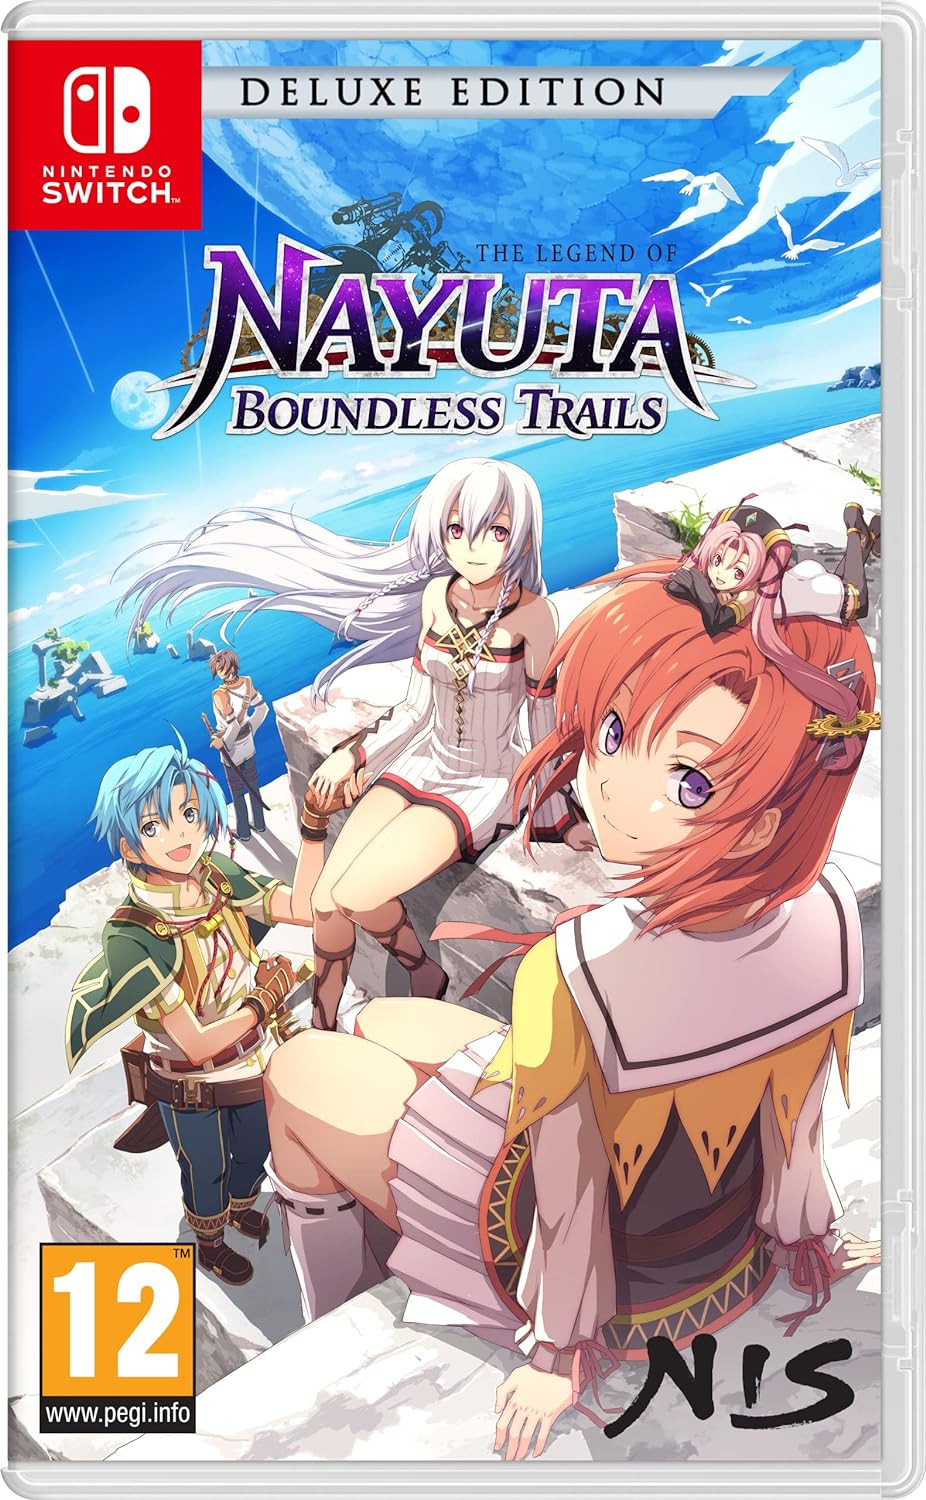 The Legend of Nayuta Boundless Trails Deluxe Edition